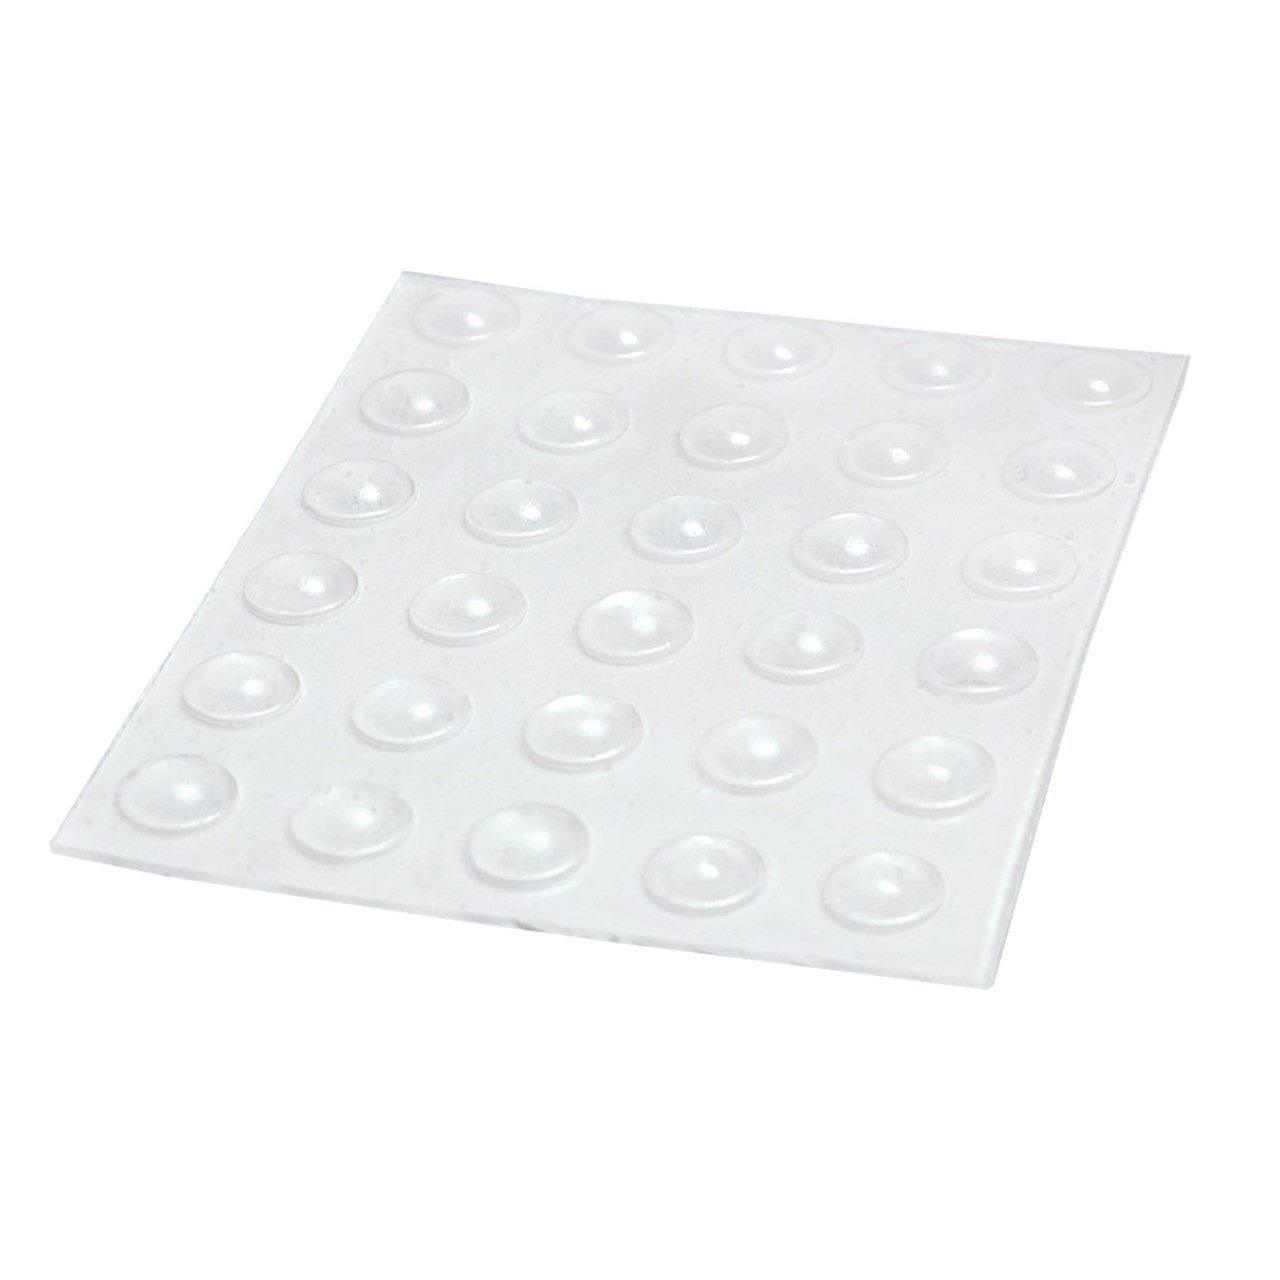 Bump Dots - Clear, Mini Rounded-Top Round Bump Dots - The Low Vision Store